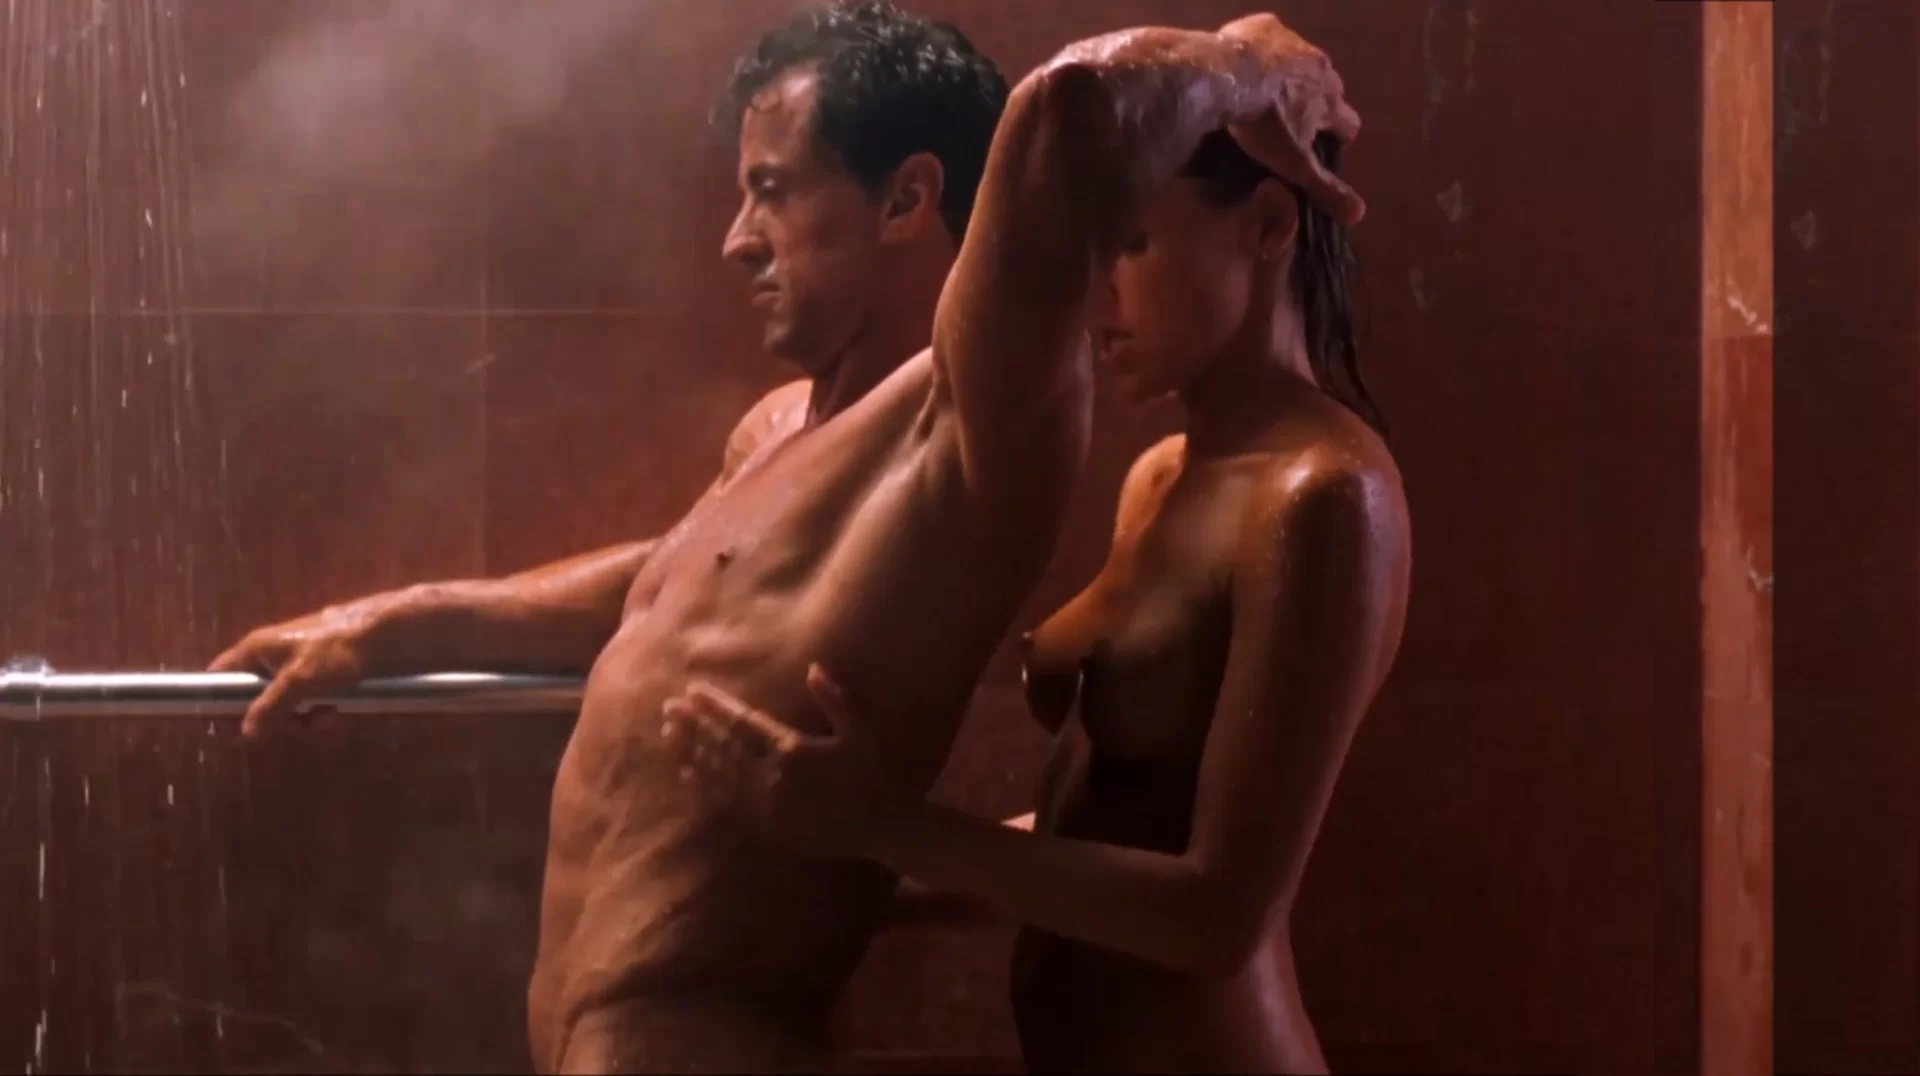 Sharon stone and sylvester stallone sex scene